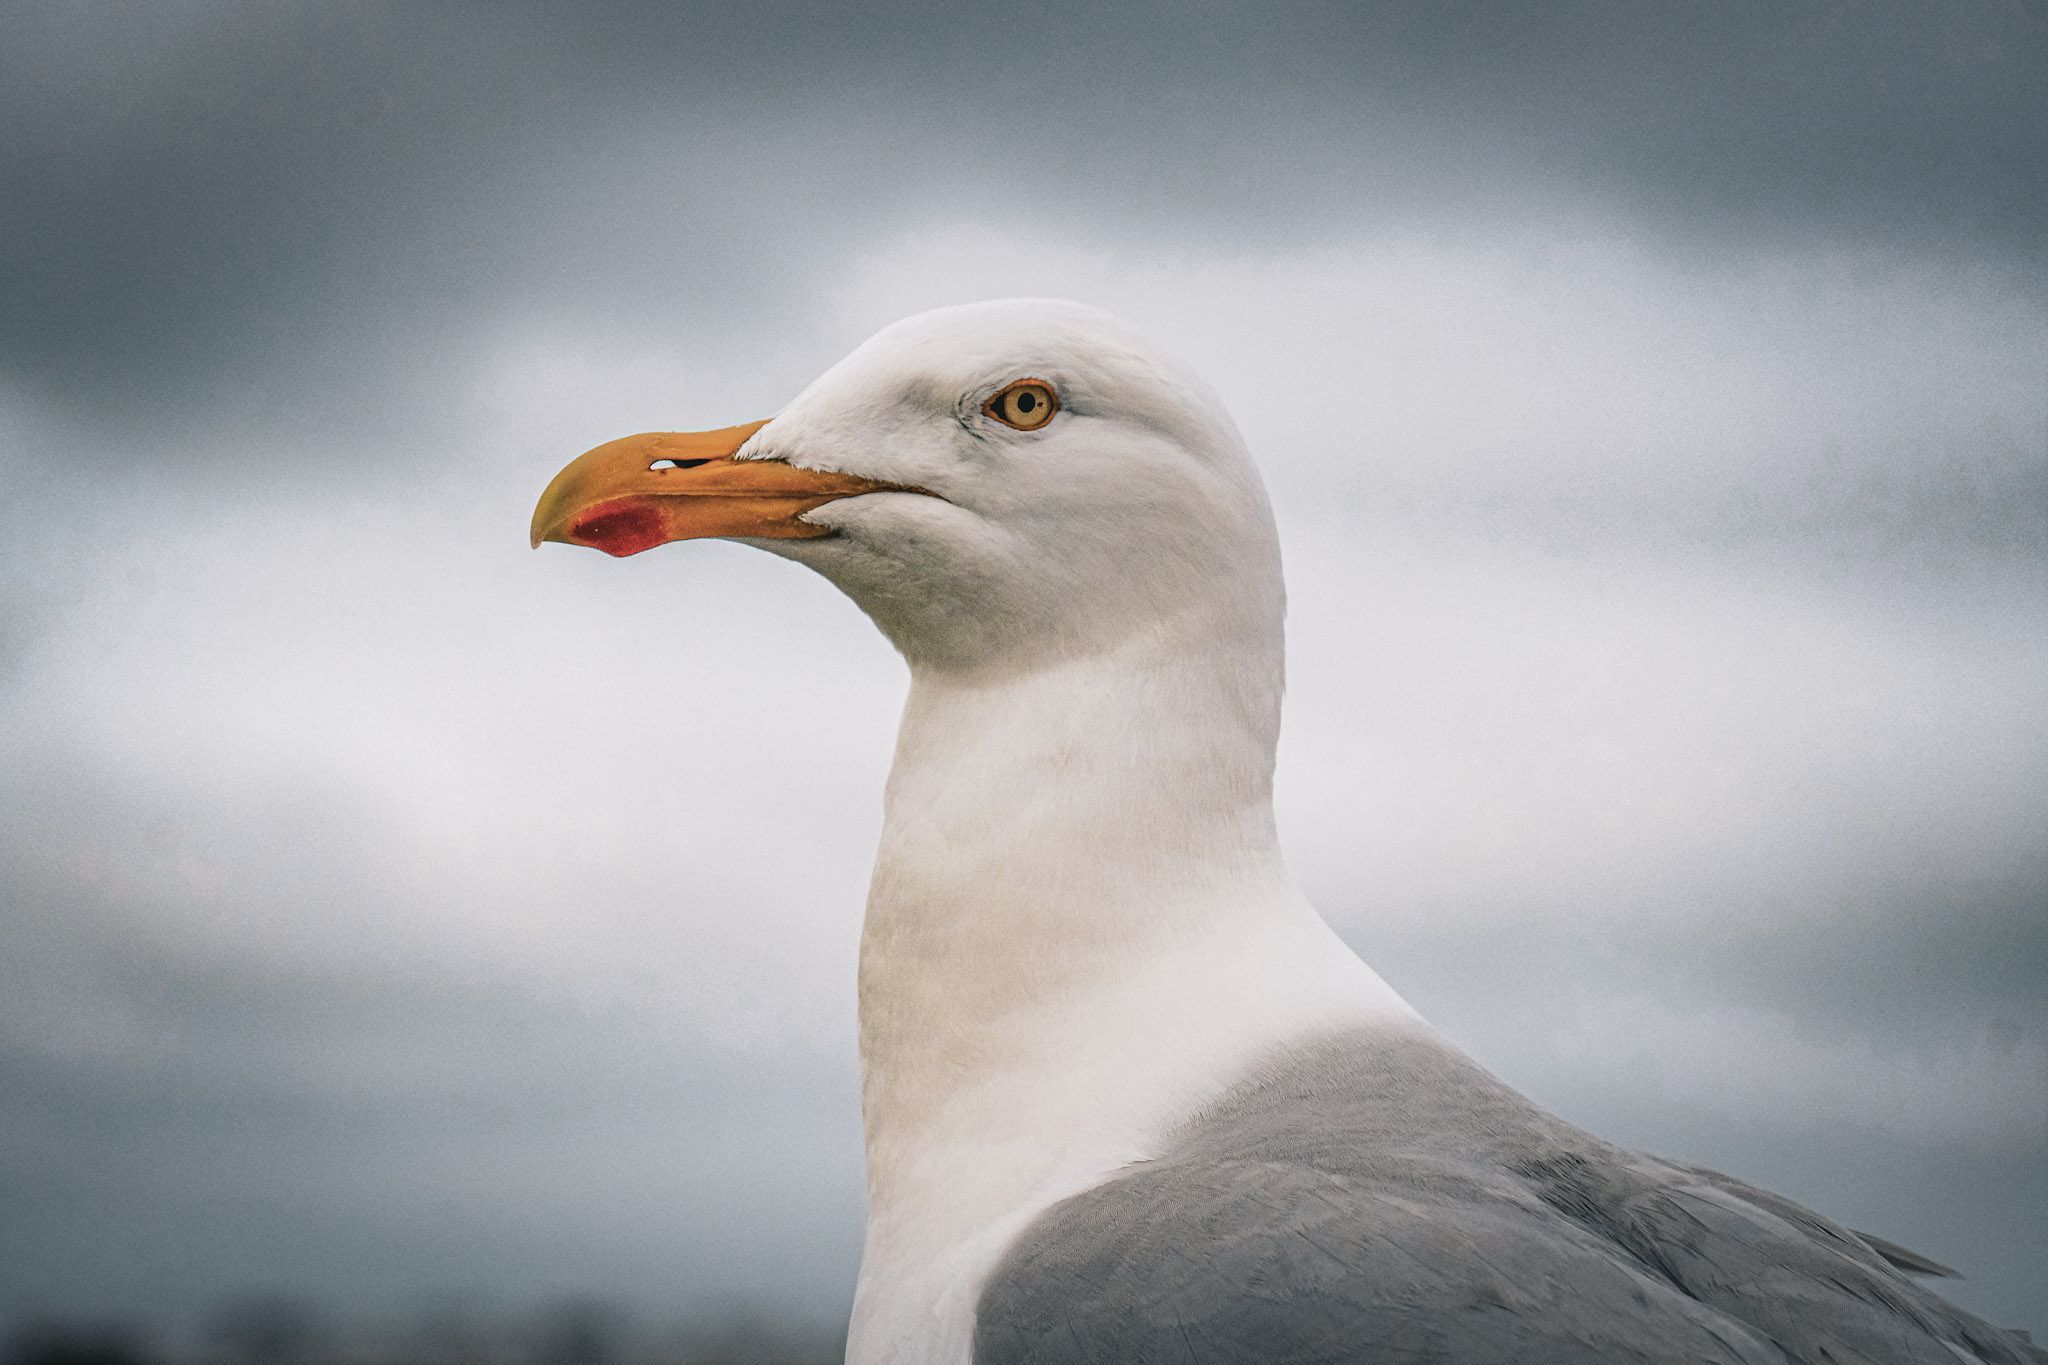 A gull, taken in profile. It has a white head and bright orange/yellow beak. It's eye looks directly at the camera.